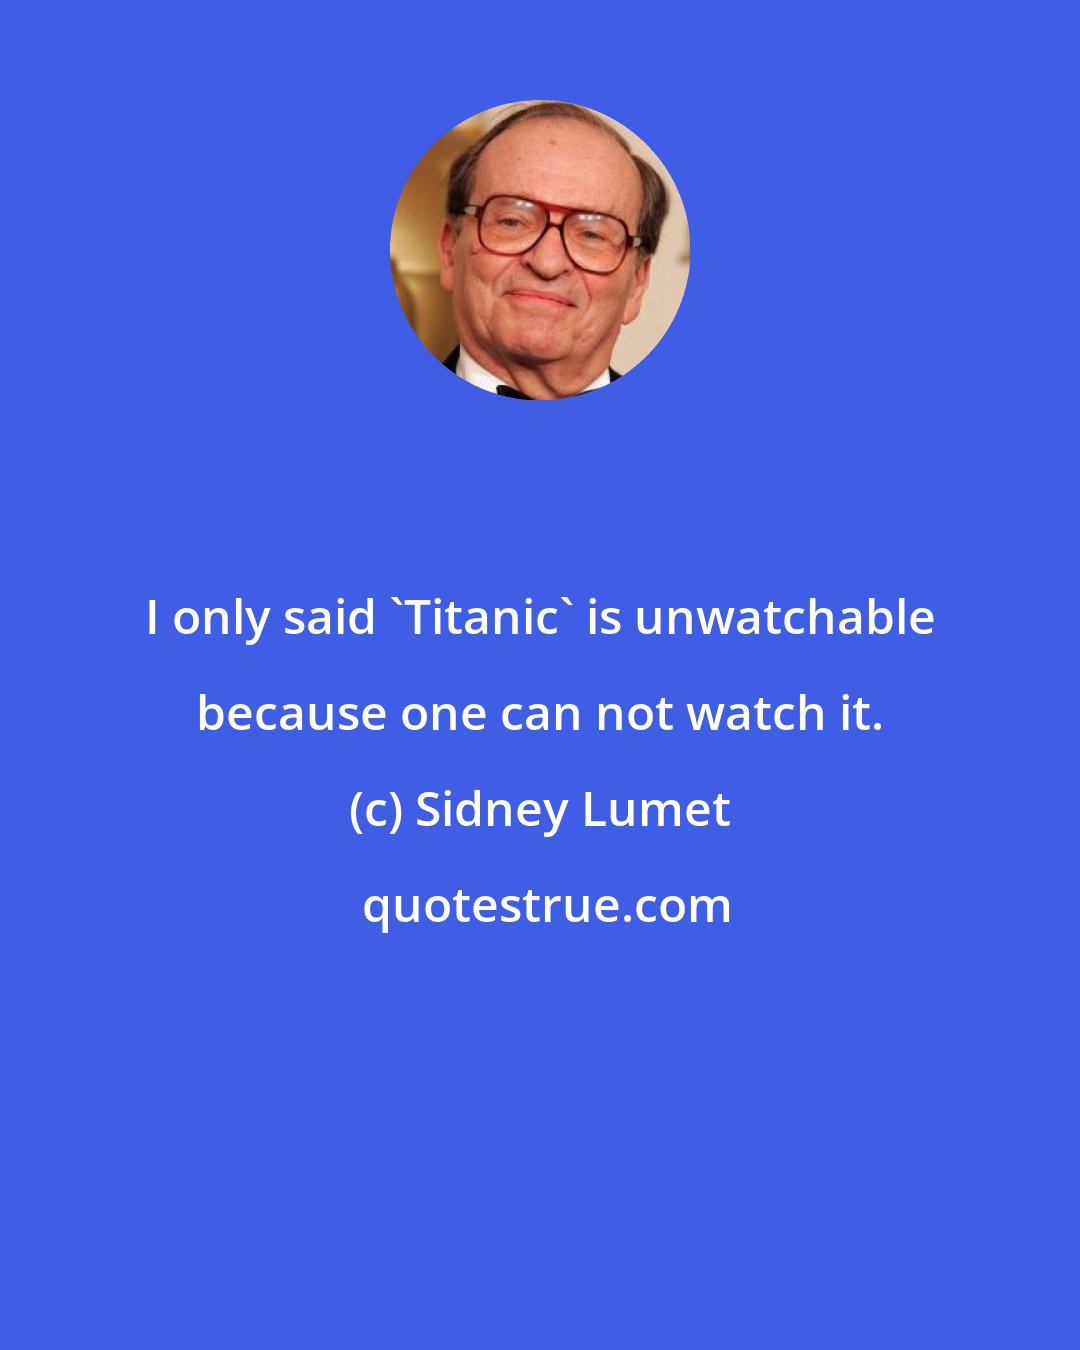 Sidney Lumet: I only said 'Titanic' is unwatchable because one can not watch it.